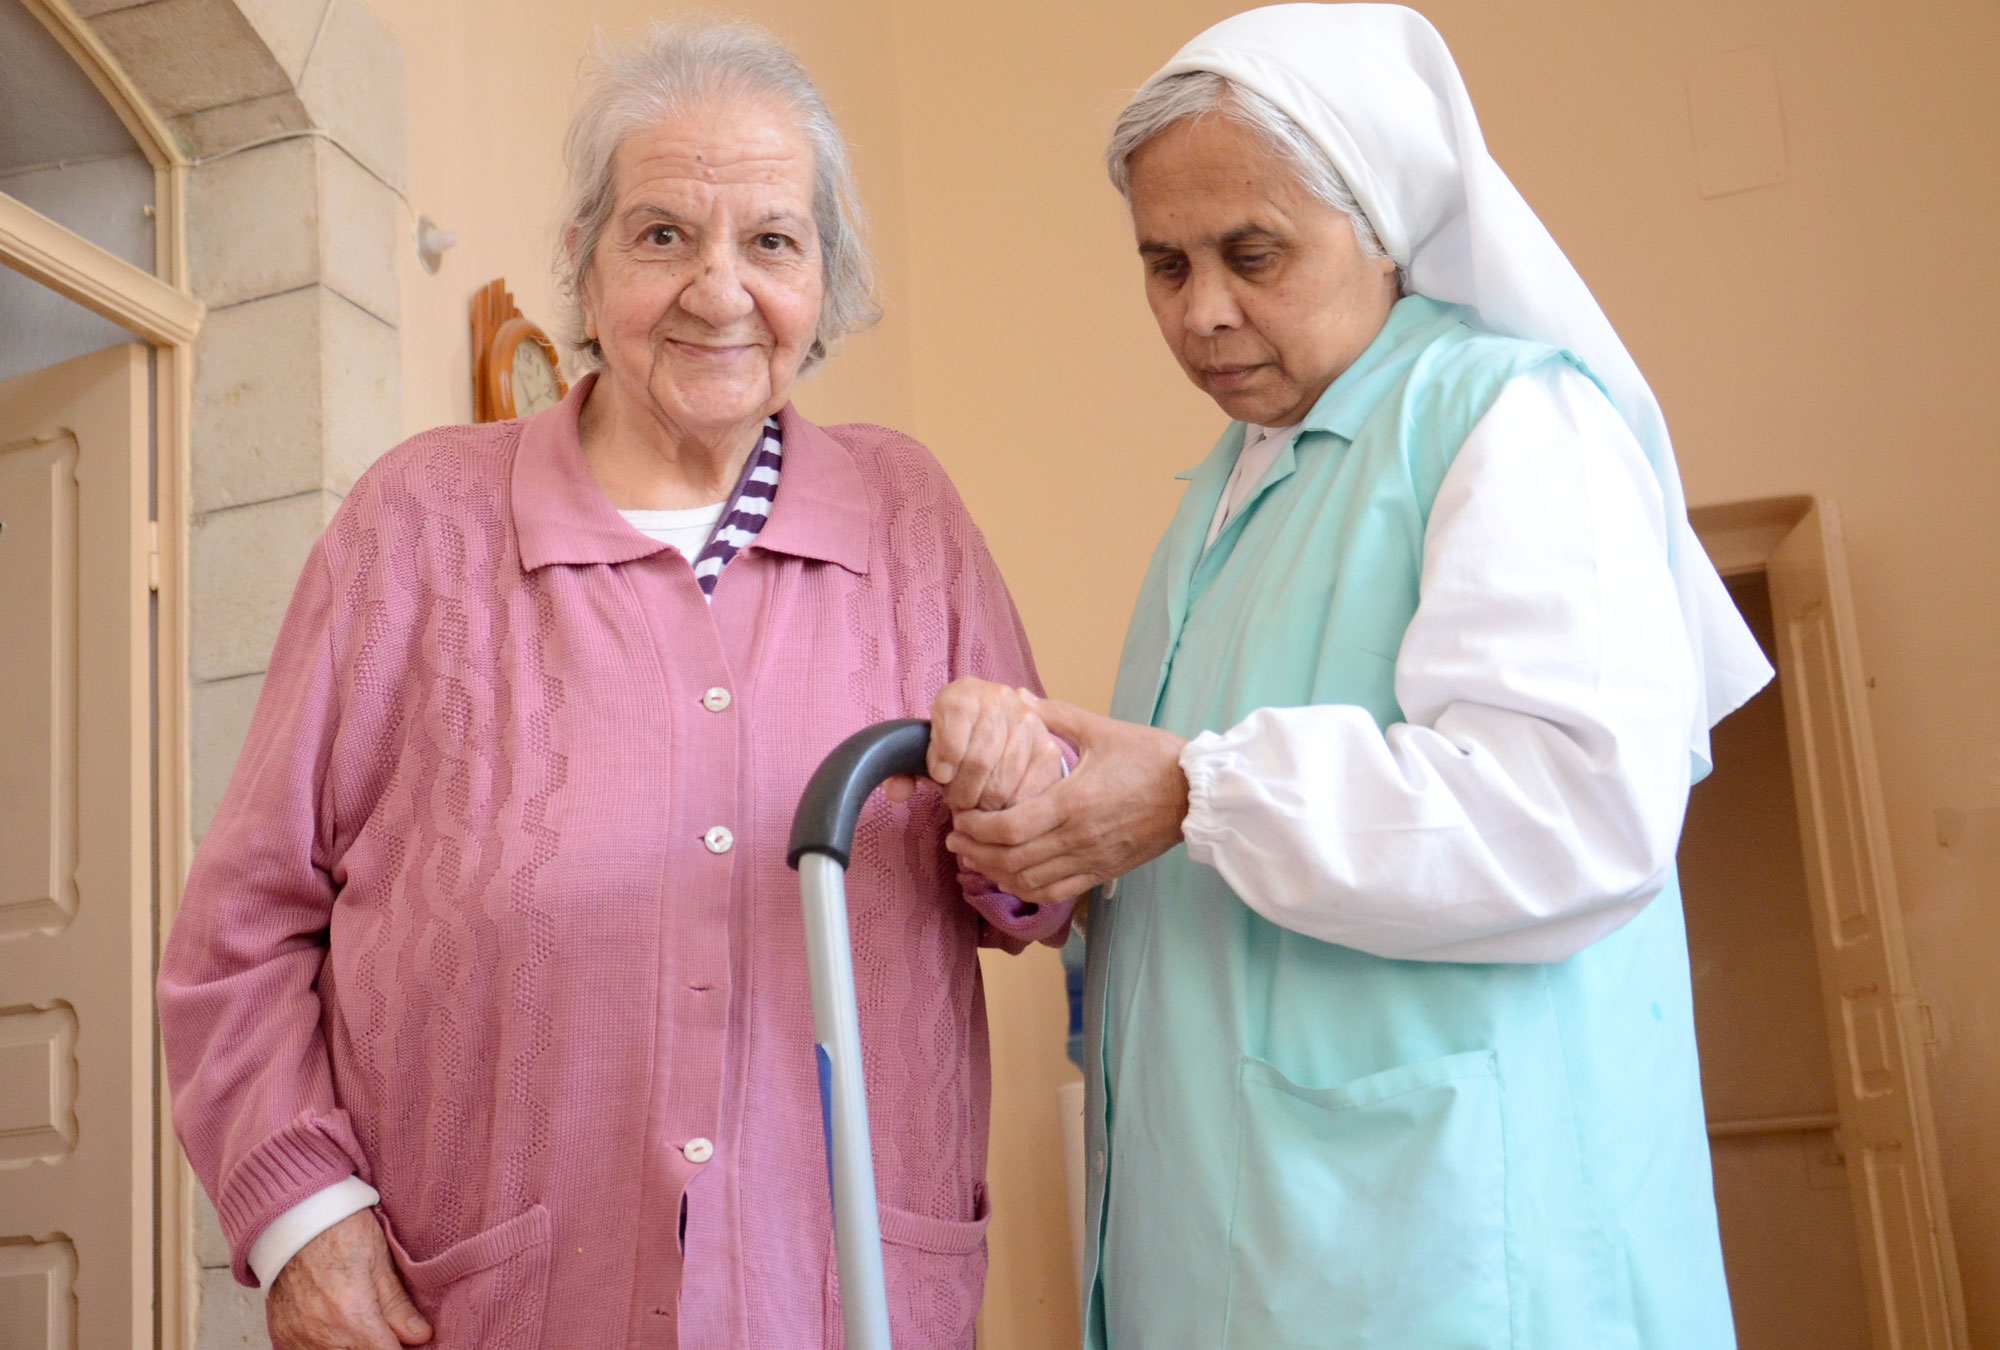 Julia, one of the residents at a Bethlehem home for the elderly, gets some help using her new cane from Anera.